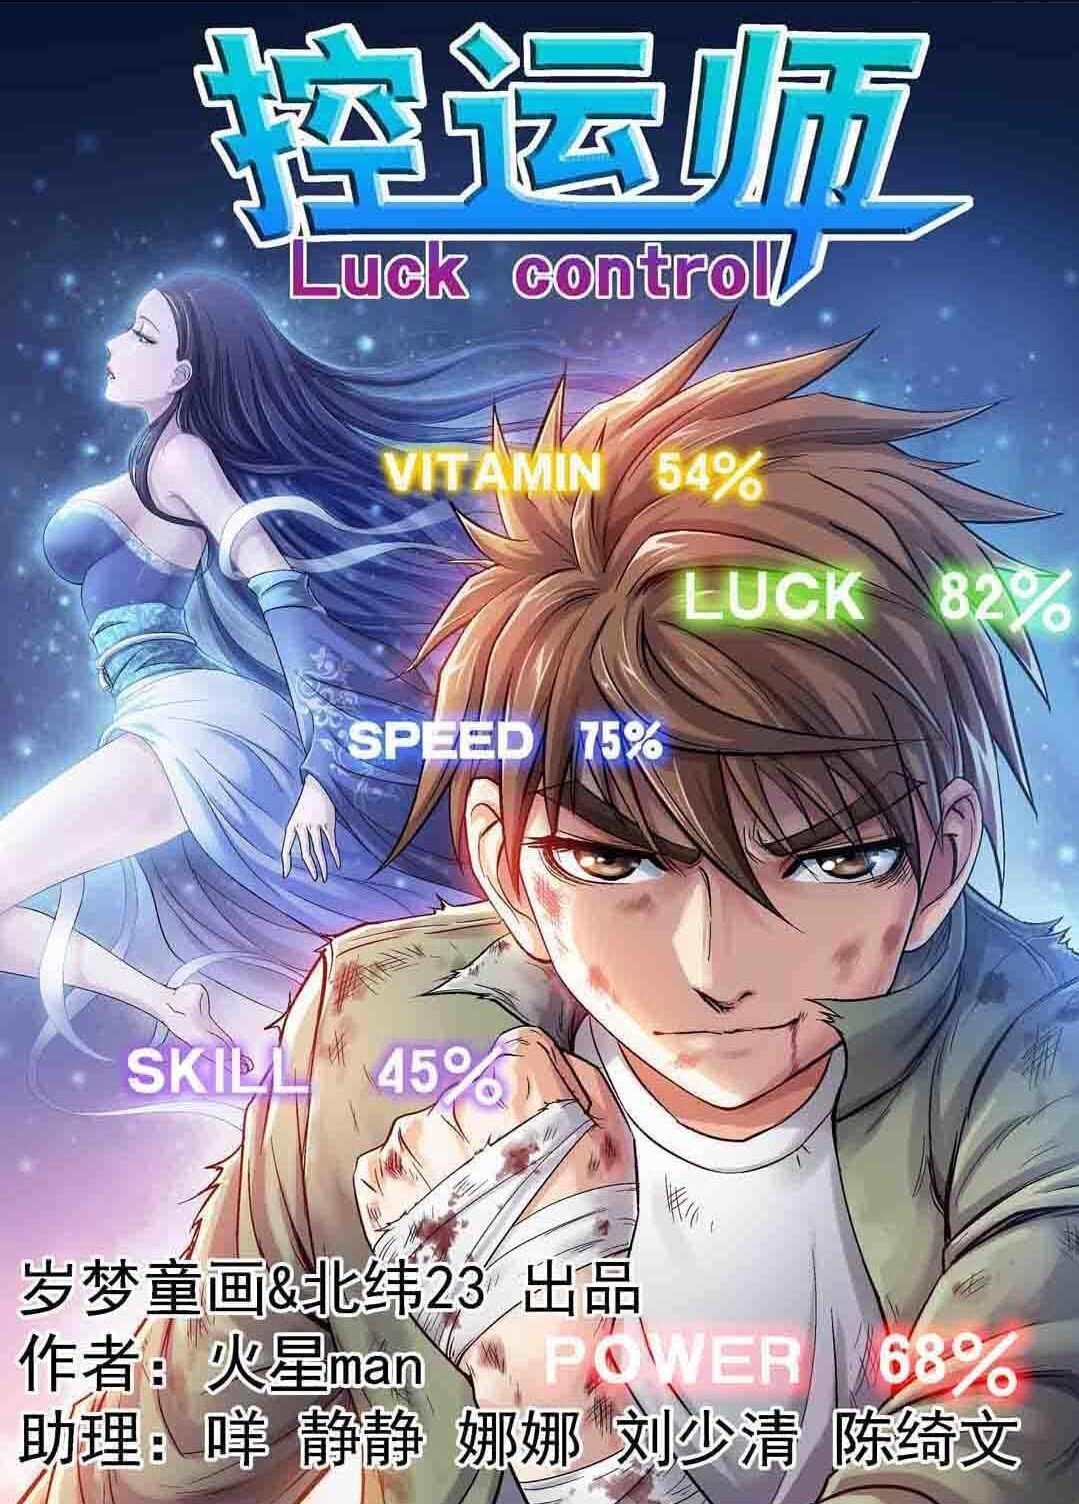 Luck Control